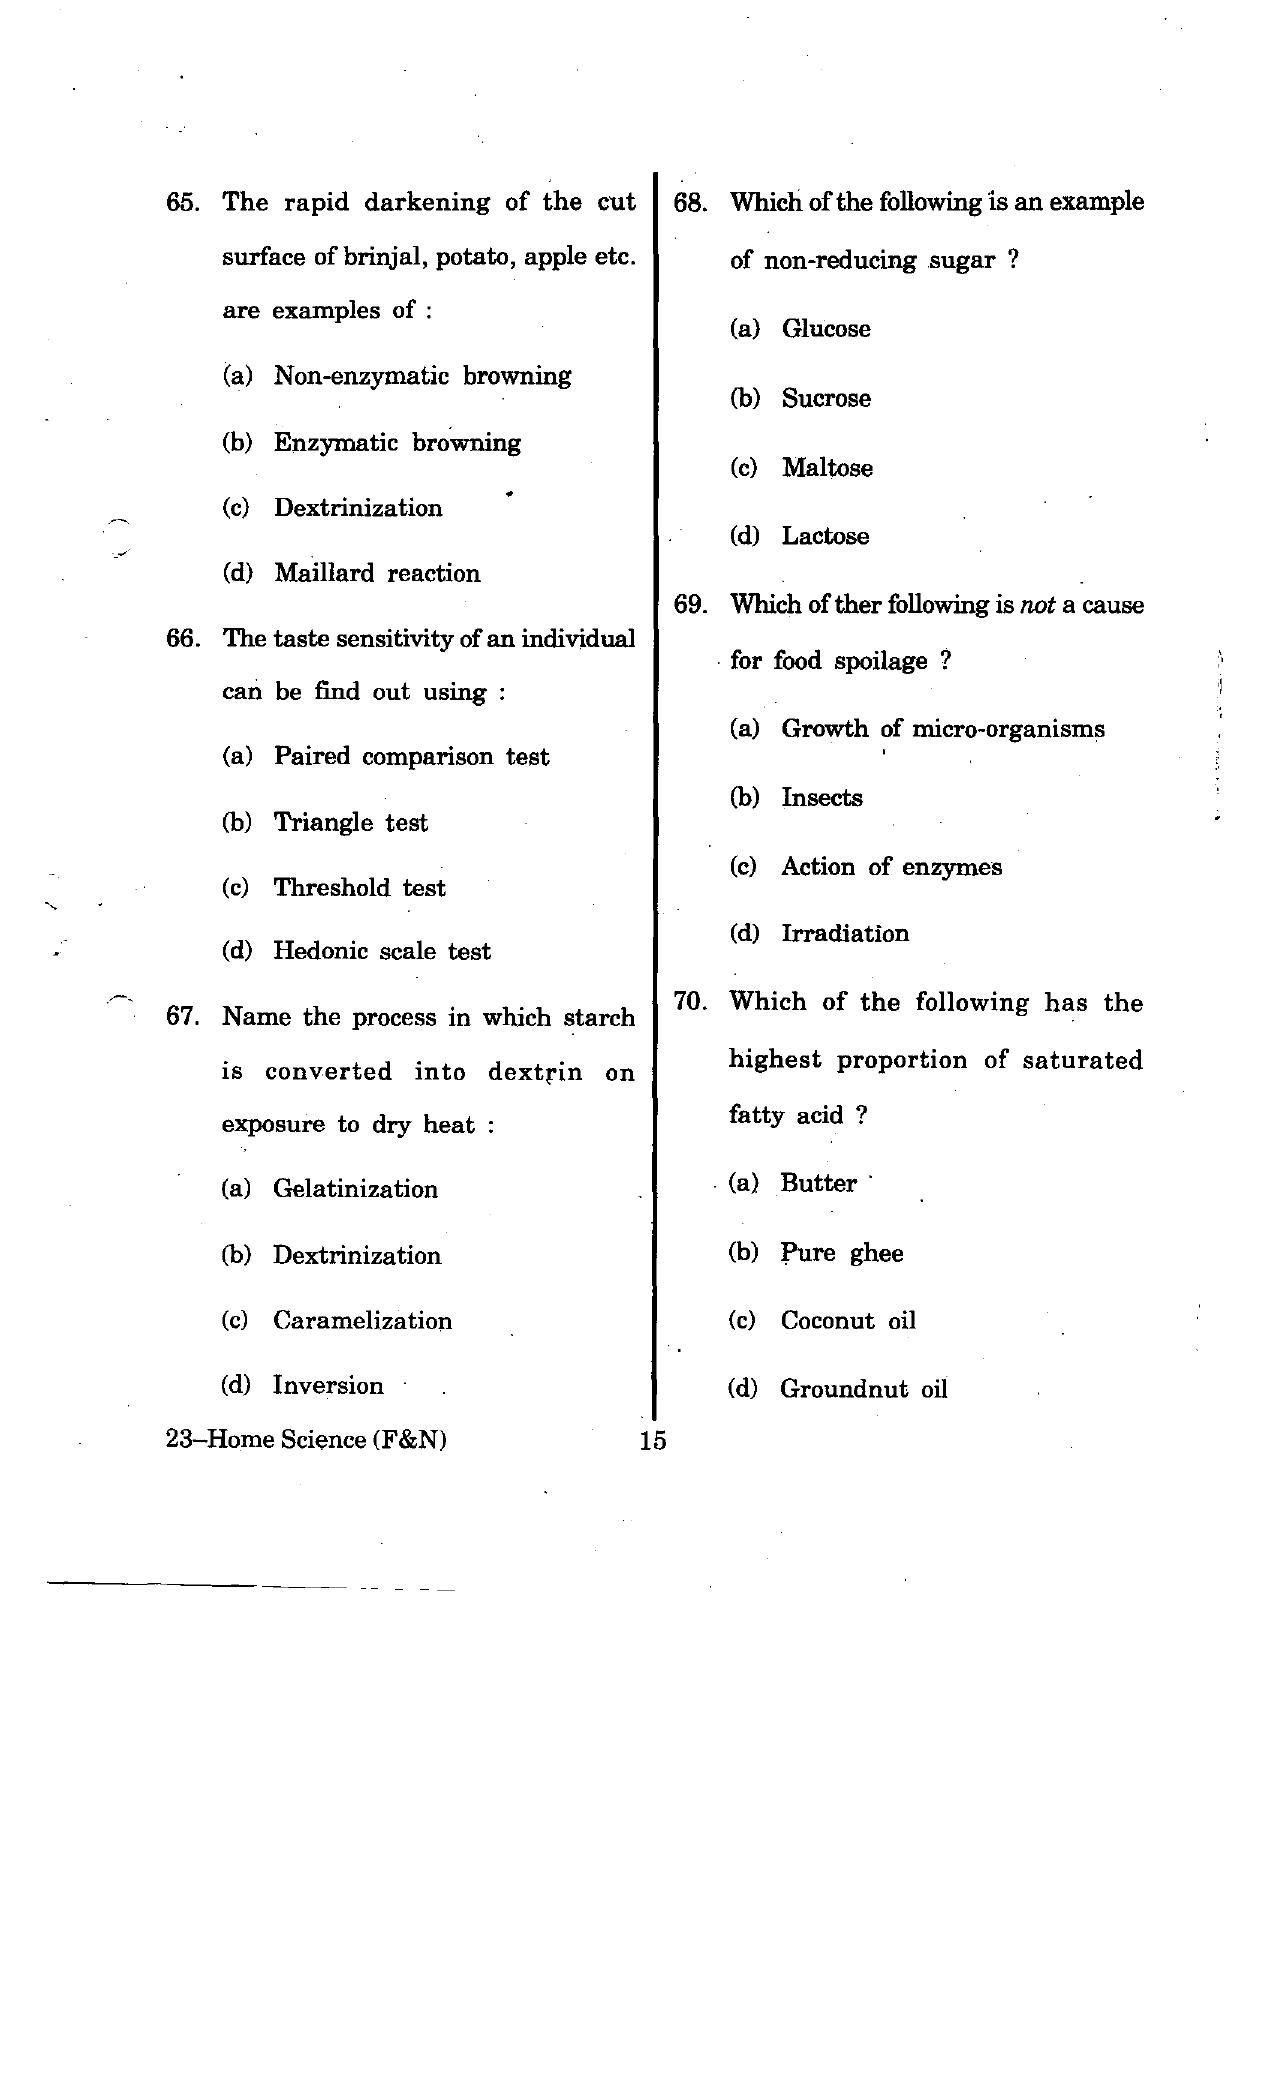 URATPG Home Science(Food & Nut.) 2012 Question Paper - Page 15